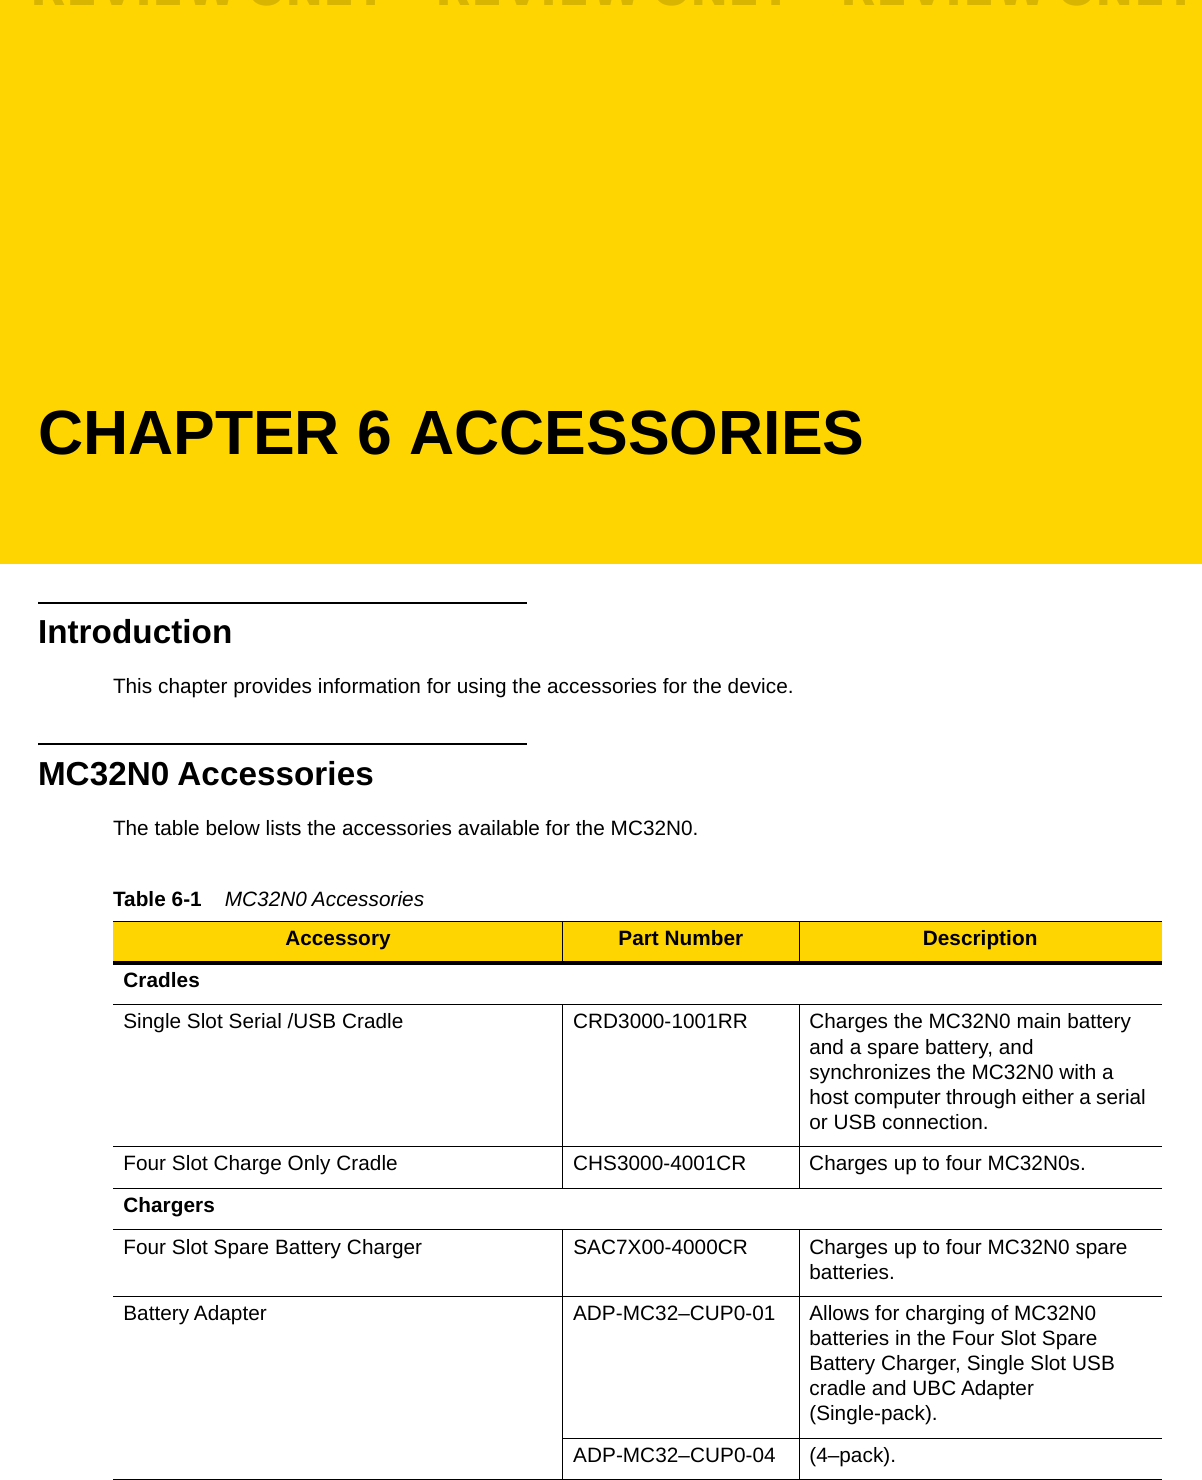 CHAPTER 6 ACCESSORIESIntroductionThis chapter provides information for using the accessories for the device.MC32N0 AccessoriesThe table below lists the accessories available for the MC32N0.Table 6-1    MC32N0 Accessories Accessory Part Number DescriptionCradlesSingle Slot Serial /USB Cradle CRD3000-1001RR Charges the MC32N0 main battery and a spare battery, and synchronizes the MC32N0 with a host computer through either a serial or USB connection.Four Slot Charge Only Cradle CHS3000-4001CR Charges up to four MC32N0s.ChargersFour Slot Spare Battery Charger SAC7X00-4000CR Charges up to four MC32N0 spare batteries.Battery Adapter ADP-MC32–CUP0-01 Allows for charging of MC32N0 batteries in the Four Slot Spare Battery Charger, Single Slot USB cradle and UBC Adapter (Single-pack).ADP-MC32–CUP0-04 (4–pack).REVIEW ONLY - REVIEW ONLY - REVIEW ONLY                             REVIEW ONLY - REVIEW ONLY - REVIEW ONLY